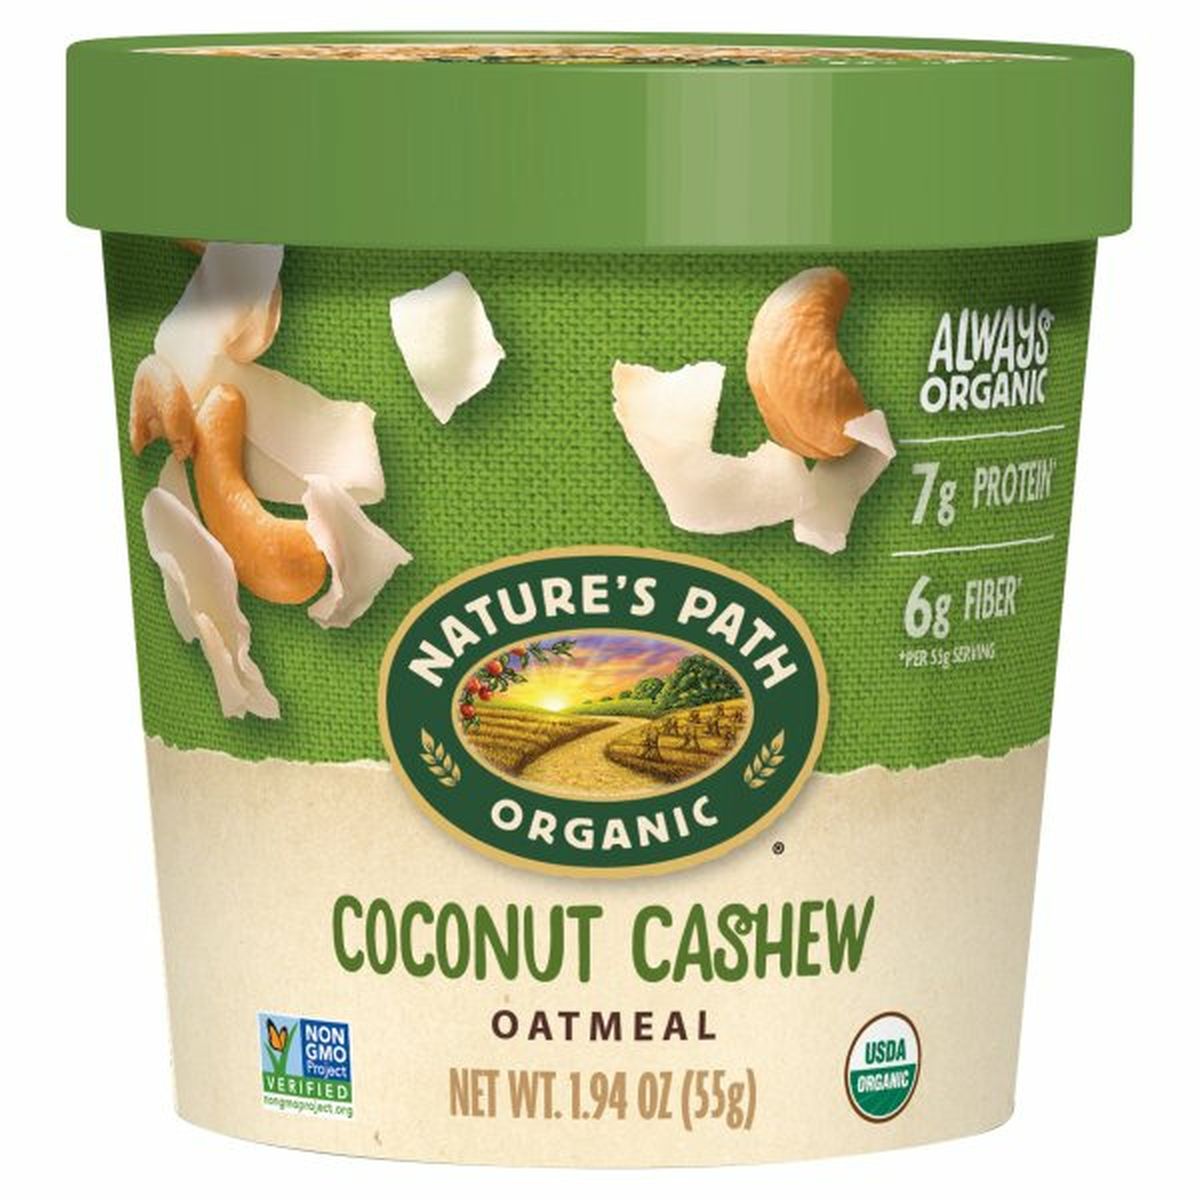 Calories in Nature's Path Oatmeal, Coconut Cashew